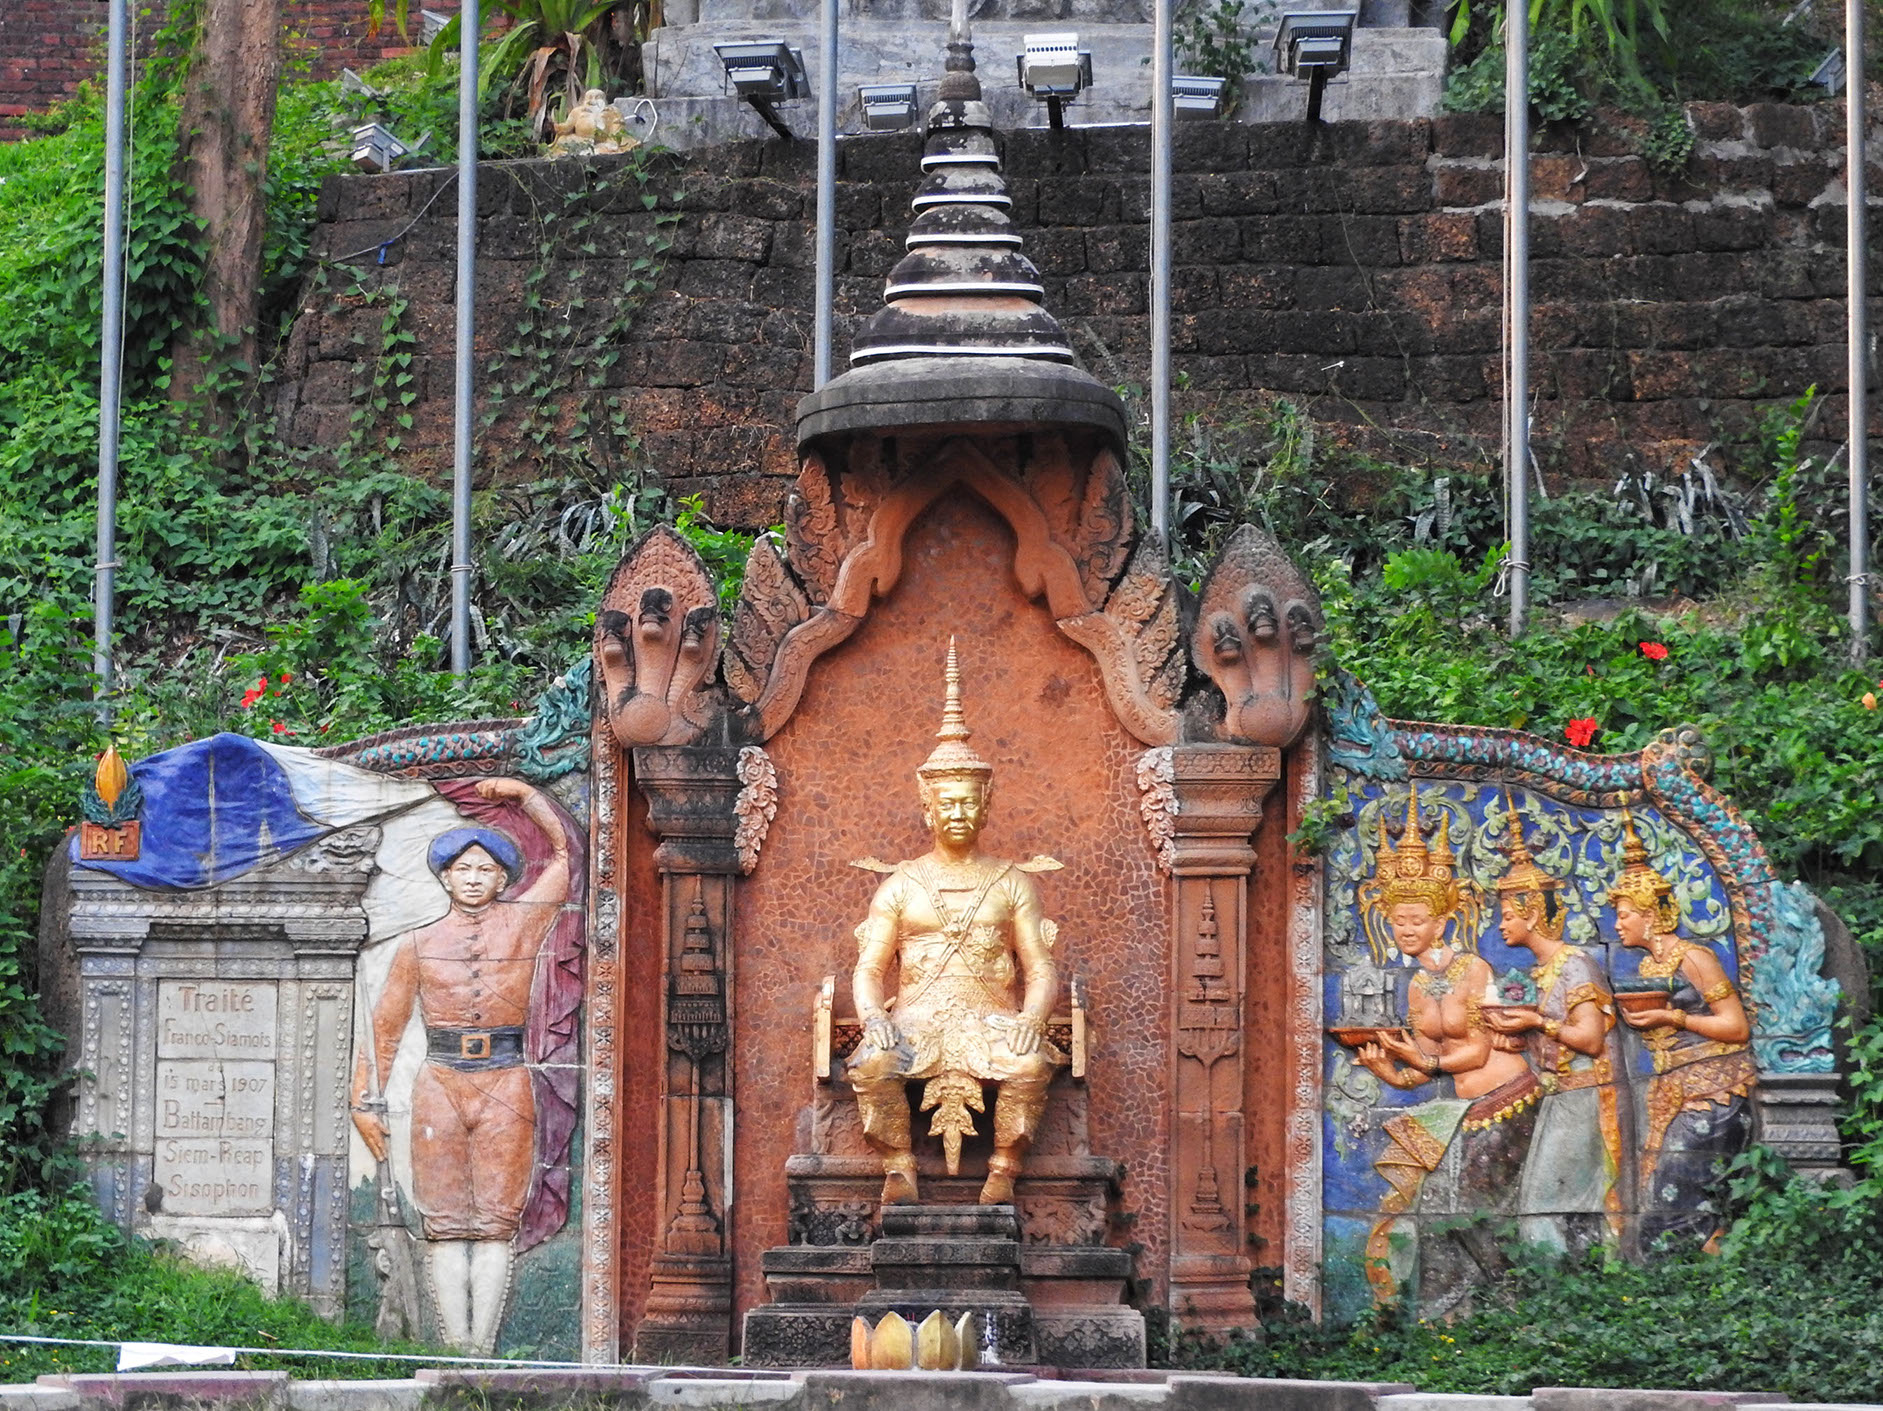 Wat Phnom's lovely garden houses a statue of the final king of the Khmer Empire, Ponhea Yat.